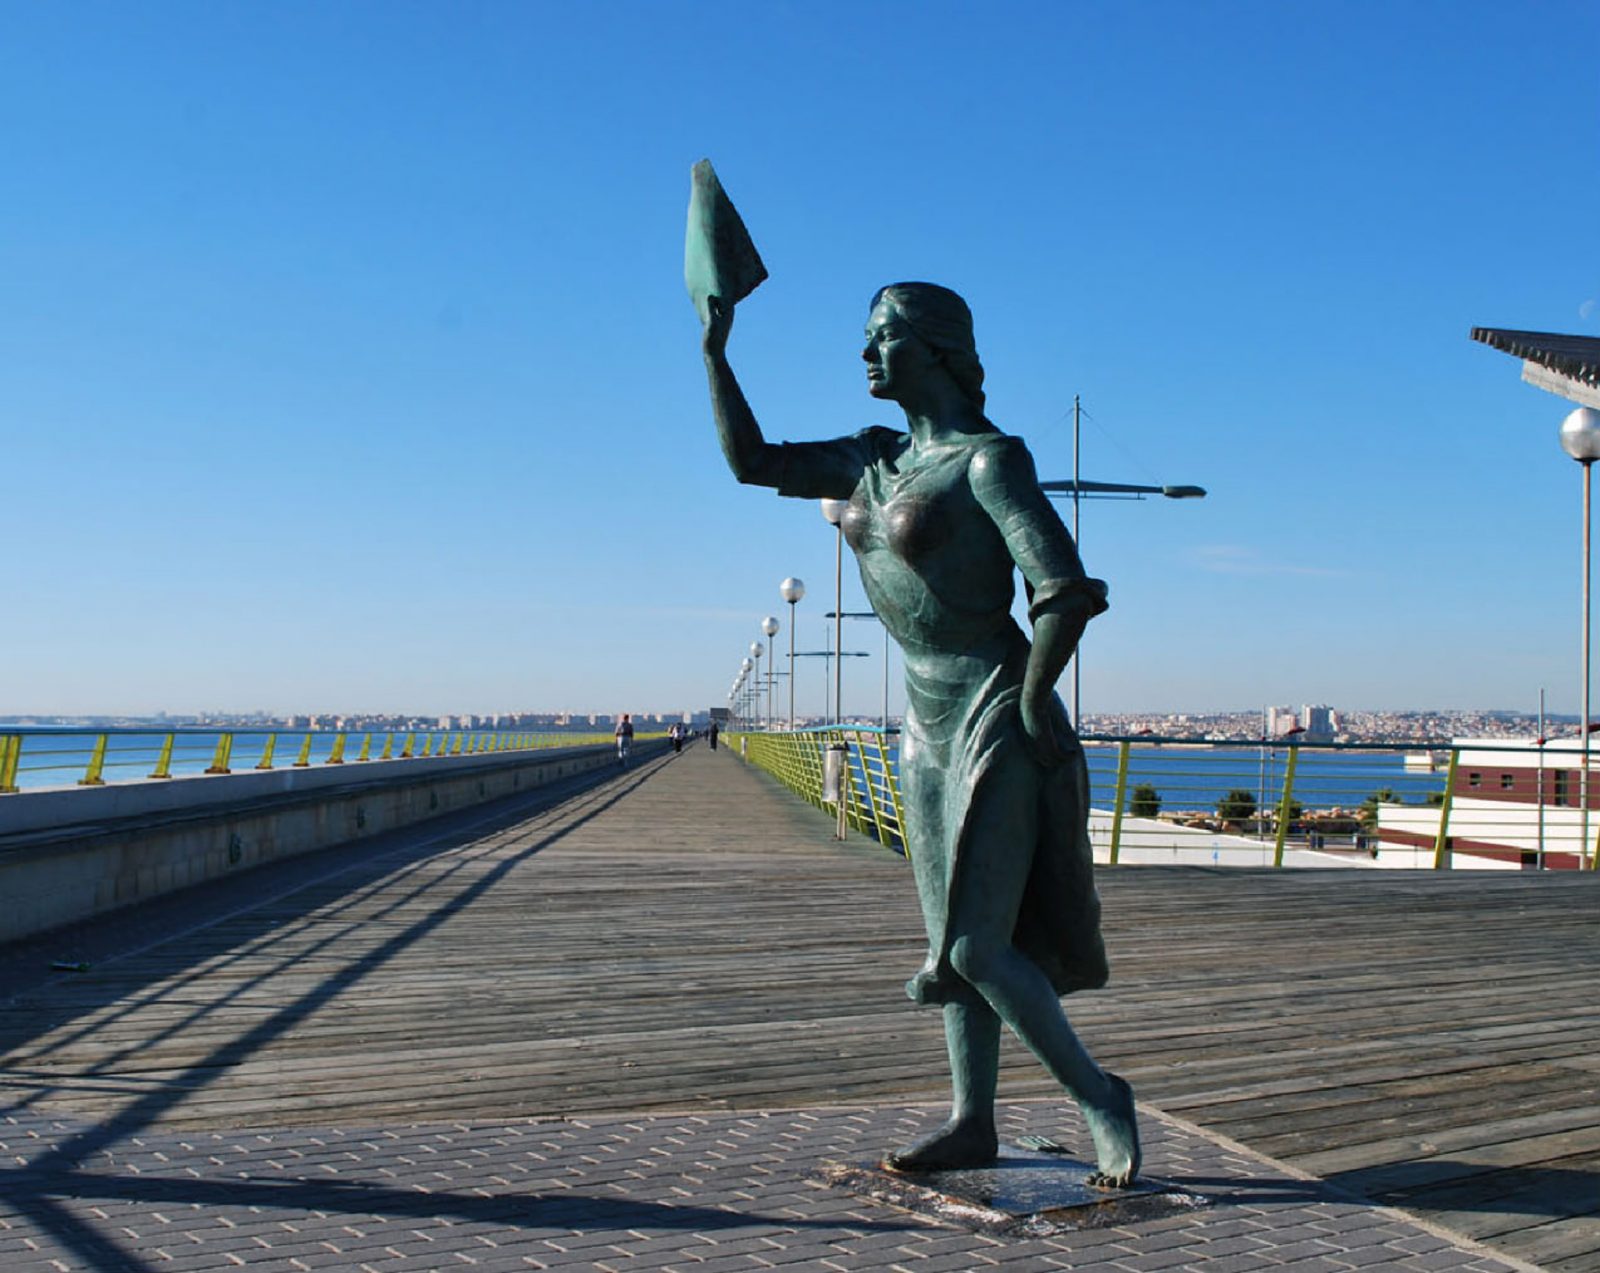 Monument to a fisherman's wife seeing her husband off to sea (Monumento a la mujer del pescador)